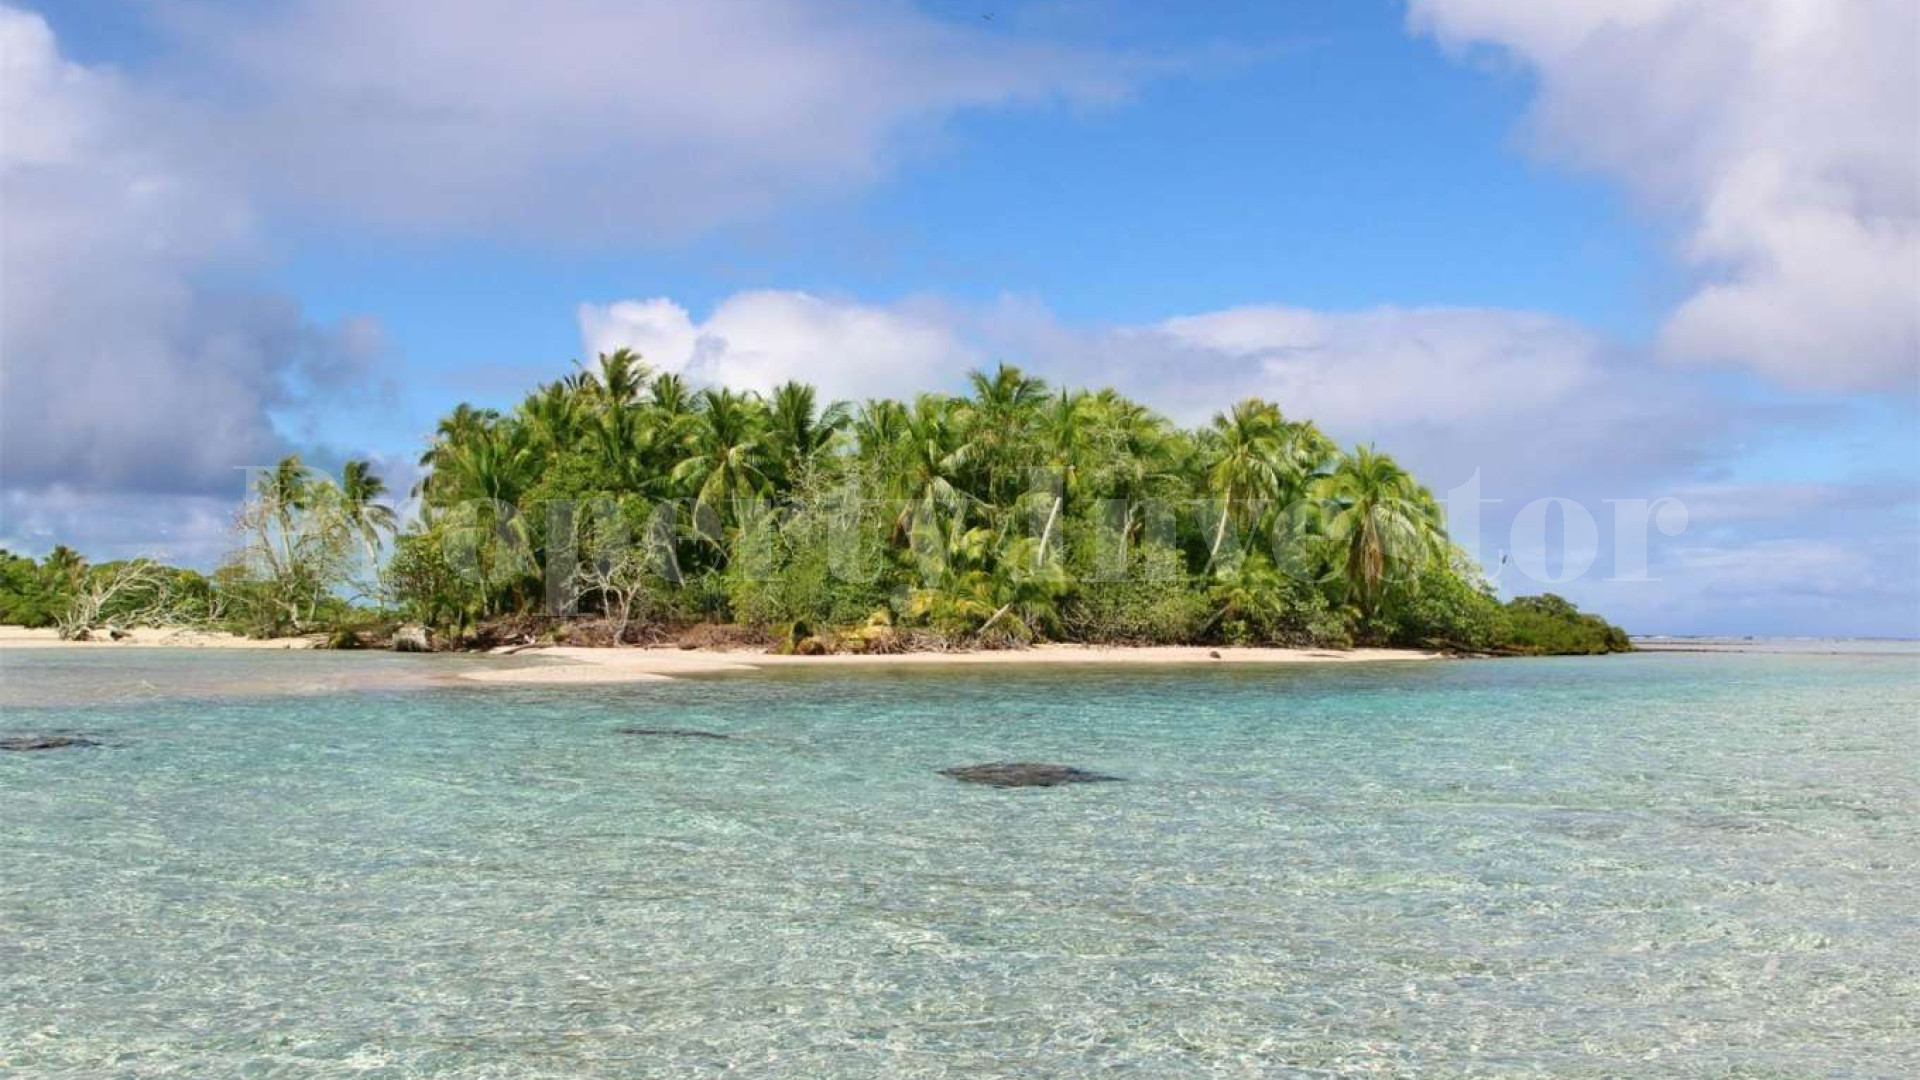 Beautiful 0.7 Hectare Virgin Island for Sale in French Polynesia